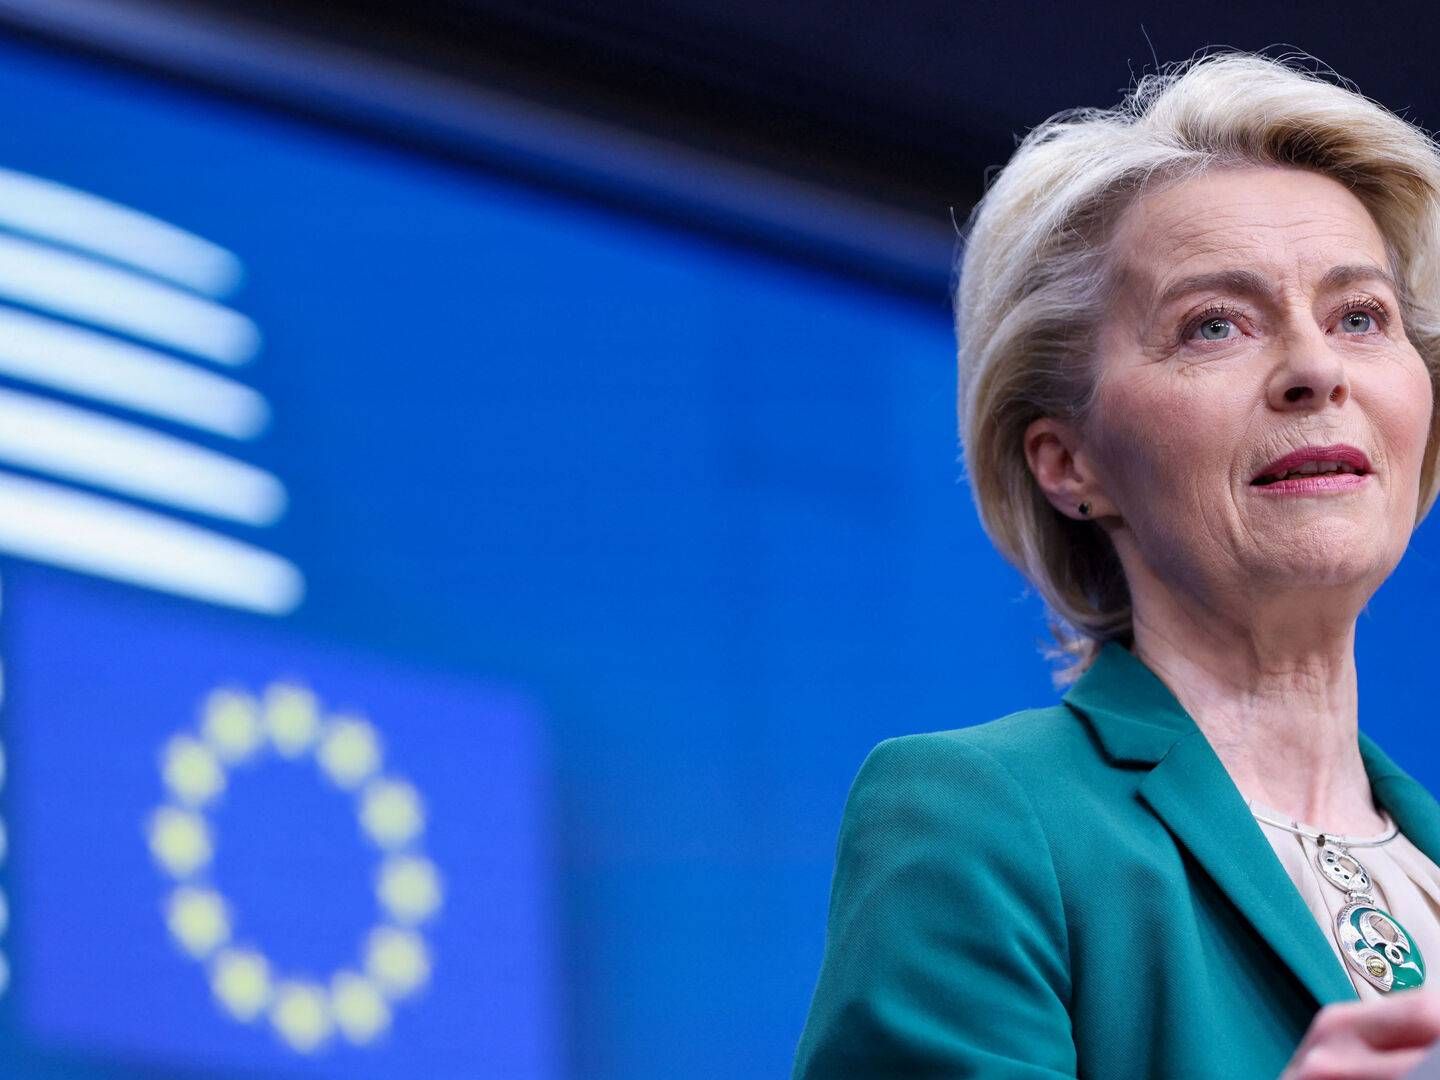 She has led the European Commission through electricity market reform, an energy crisis and increasing state aid pressure from the US. Now Ursula von der Leyen is reportedly set for another five years as head of the EU's powerful civil service. | Photo: Johanna Geron/Reuters/Ritzau Scanpix